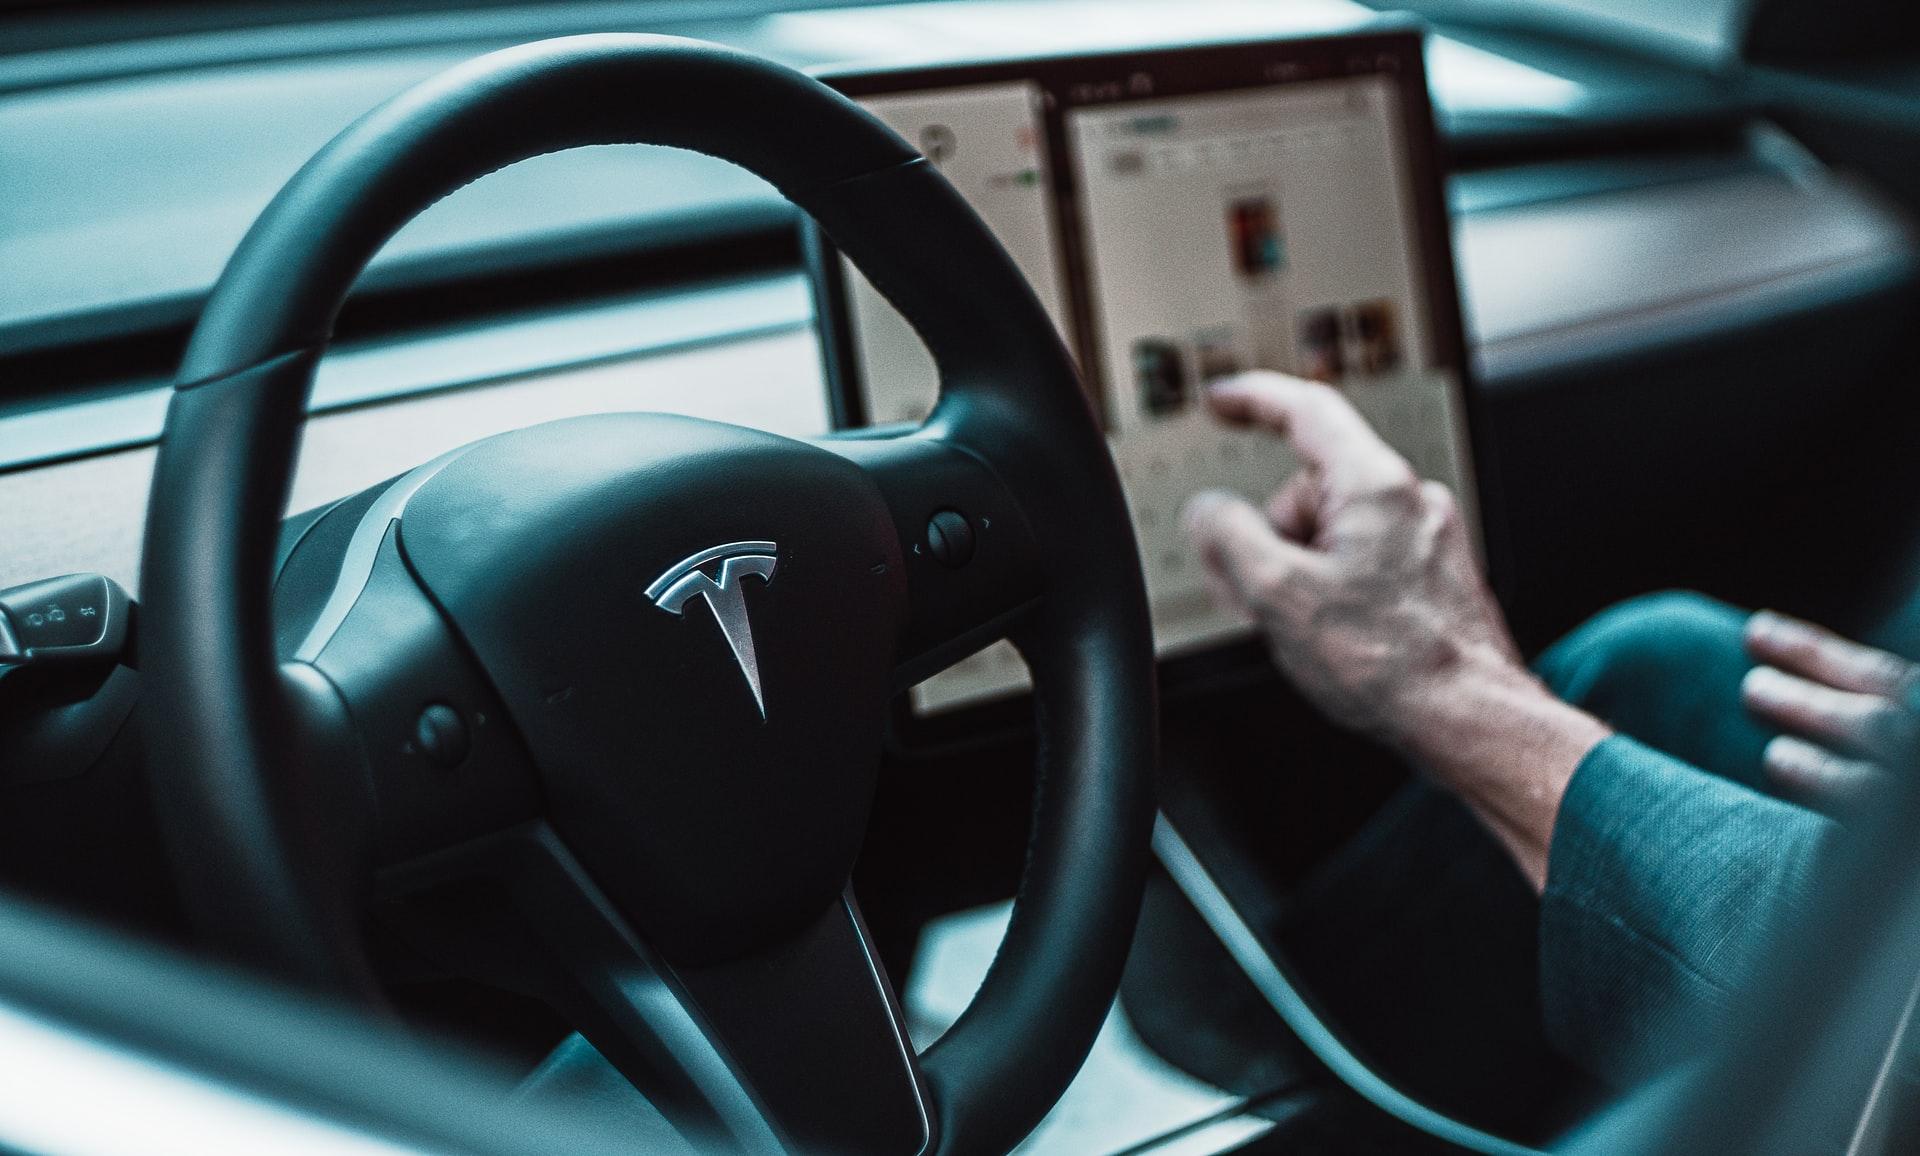 Tesla is an automaker that’s focused on car software